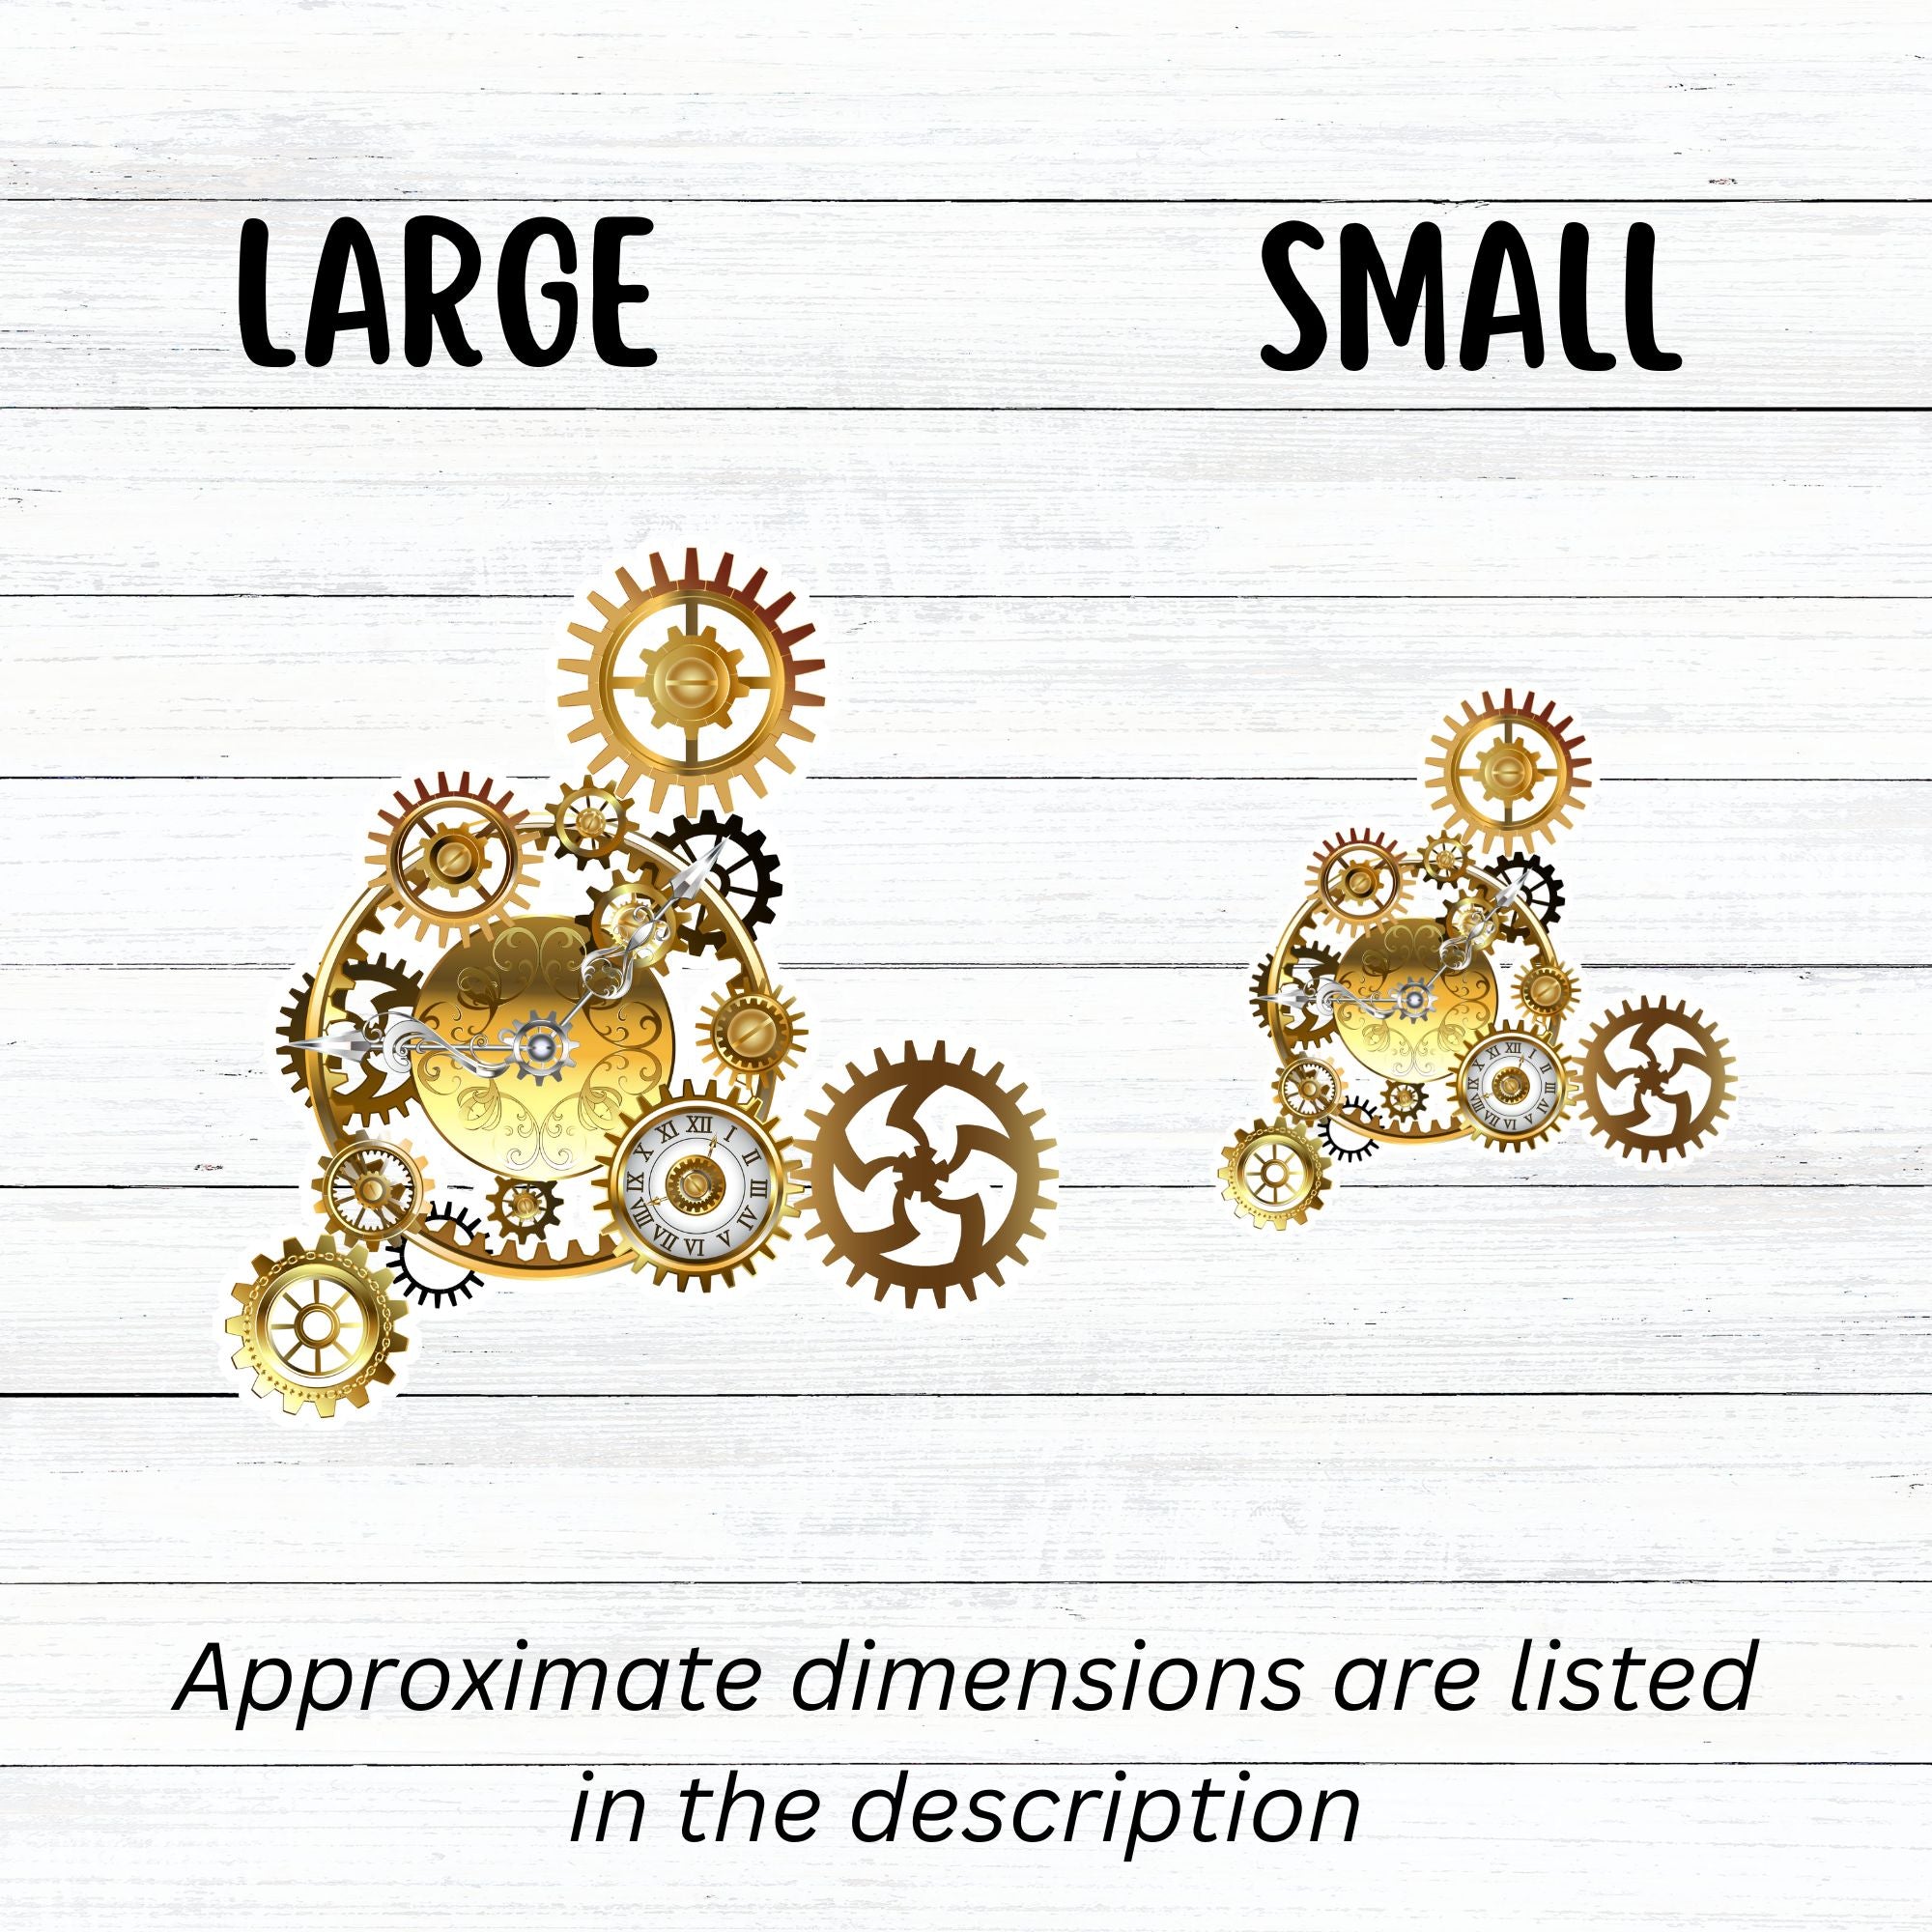 Nothing is more iconic for steampunk than gears and clocks. The steampunk gears individual die-cut sticker is a classic steampunk type image with gears and clocks. This image shows large and small steampunk gear stickers next to each other.